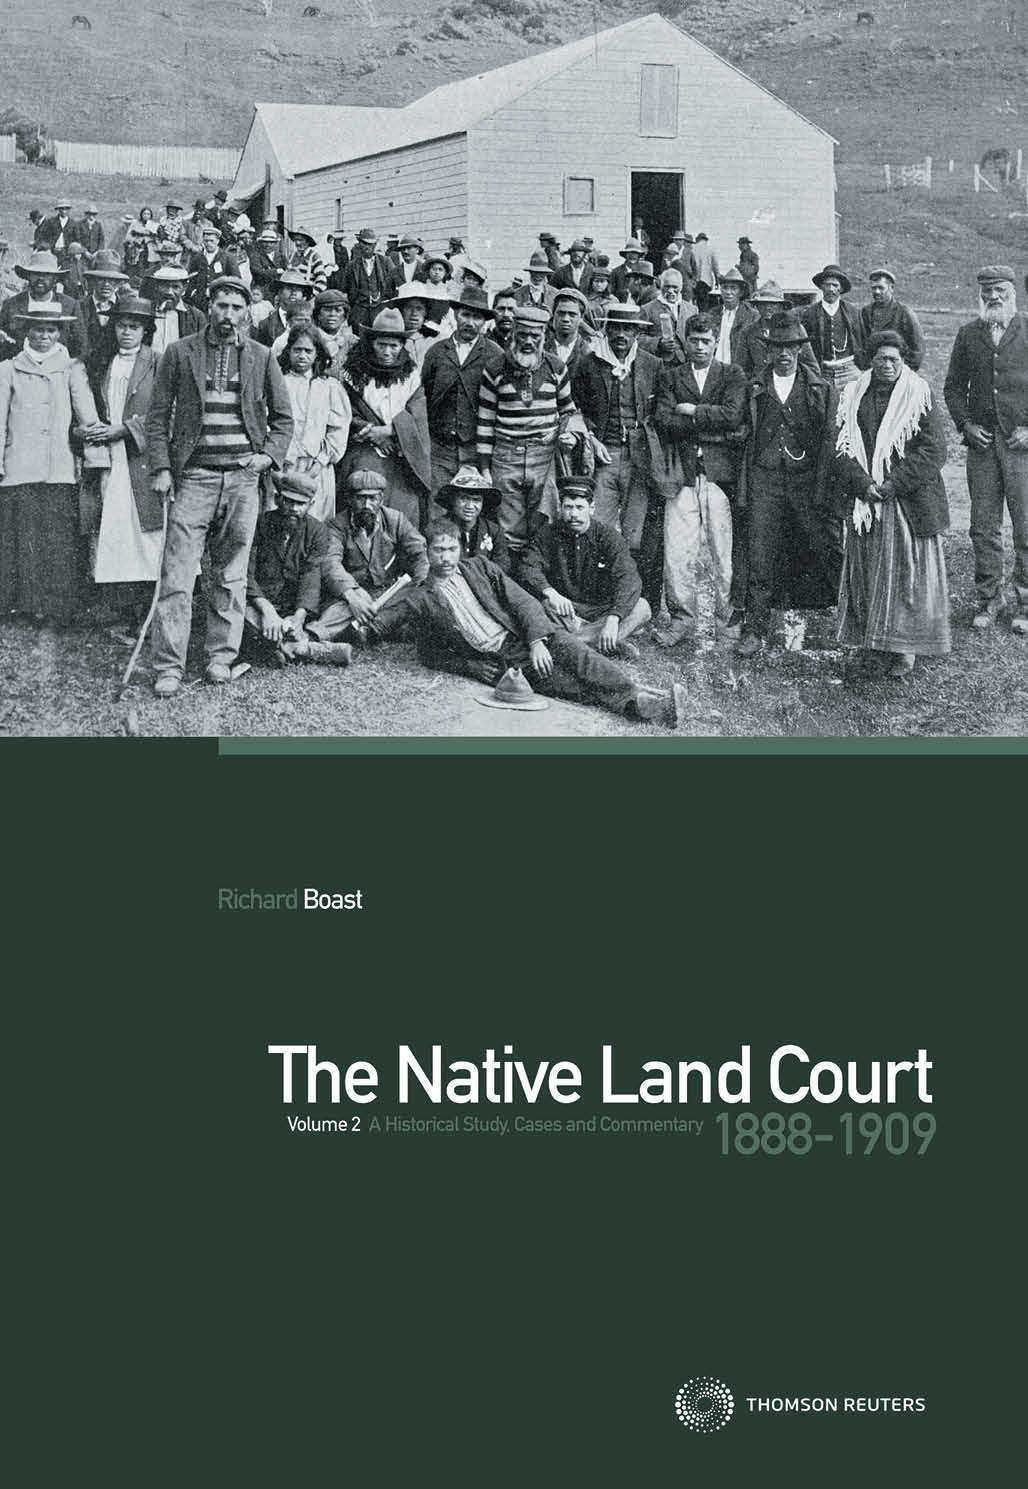 The Native Land Court Volume 2 1888-1909: A Historical Study, Cases and Commentary (eBook)